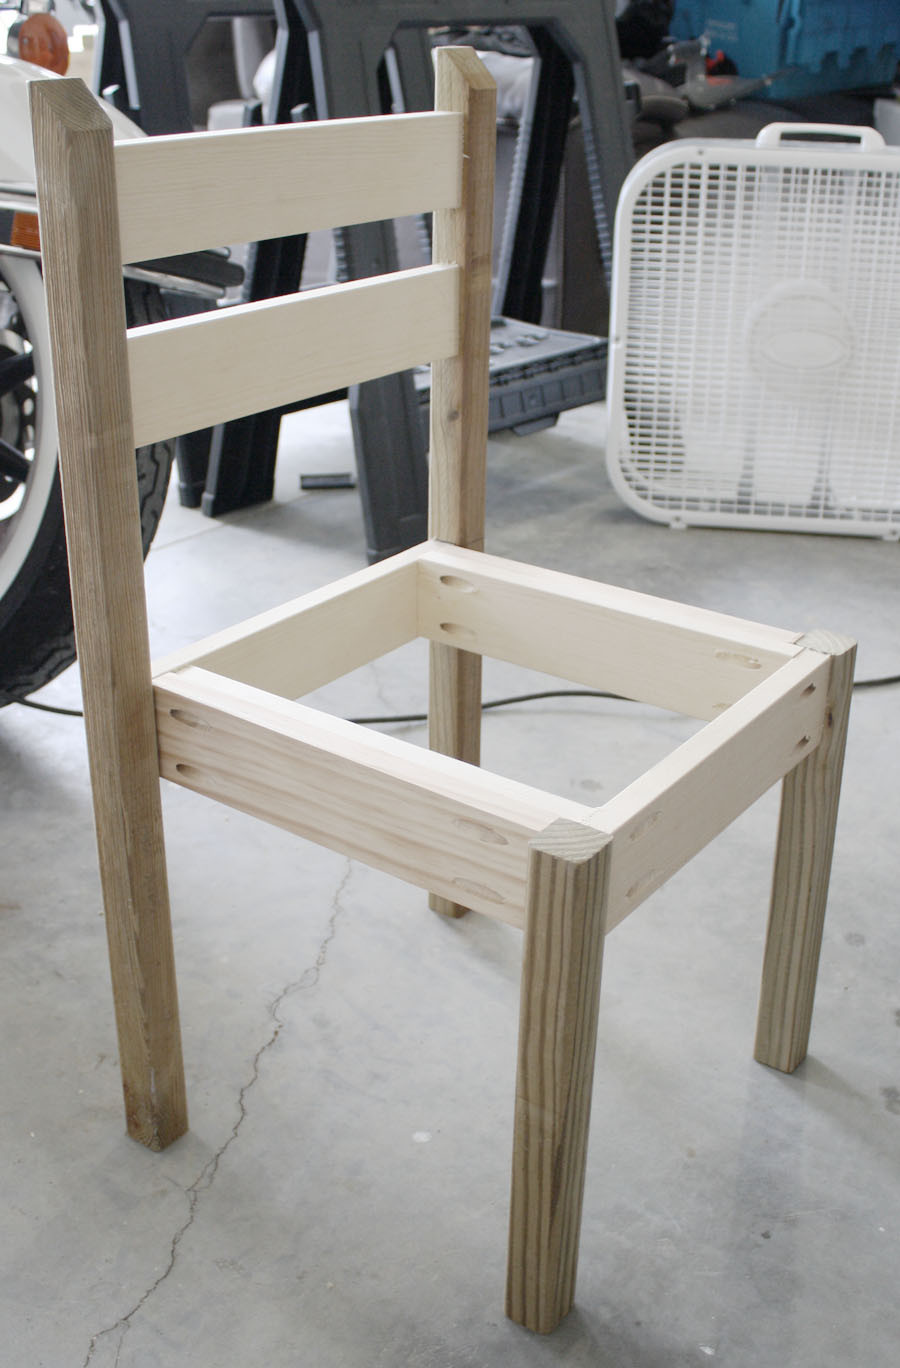 DIY Toddler Table And Chairs
 How To Build A DIY Kids Chair